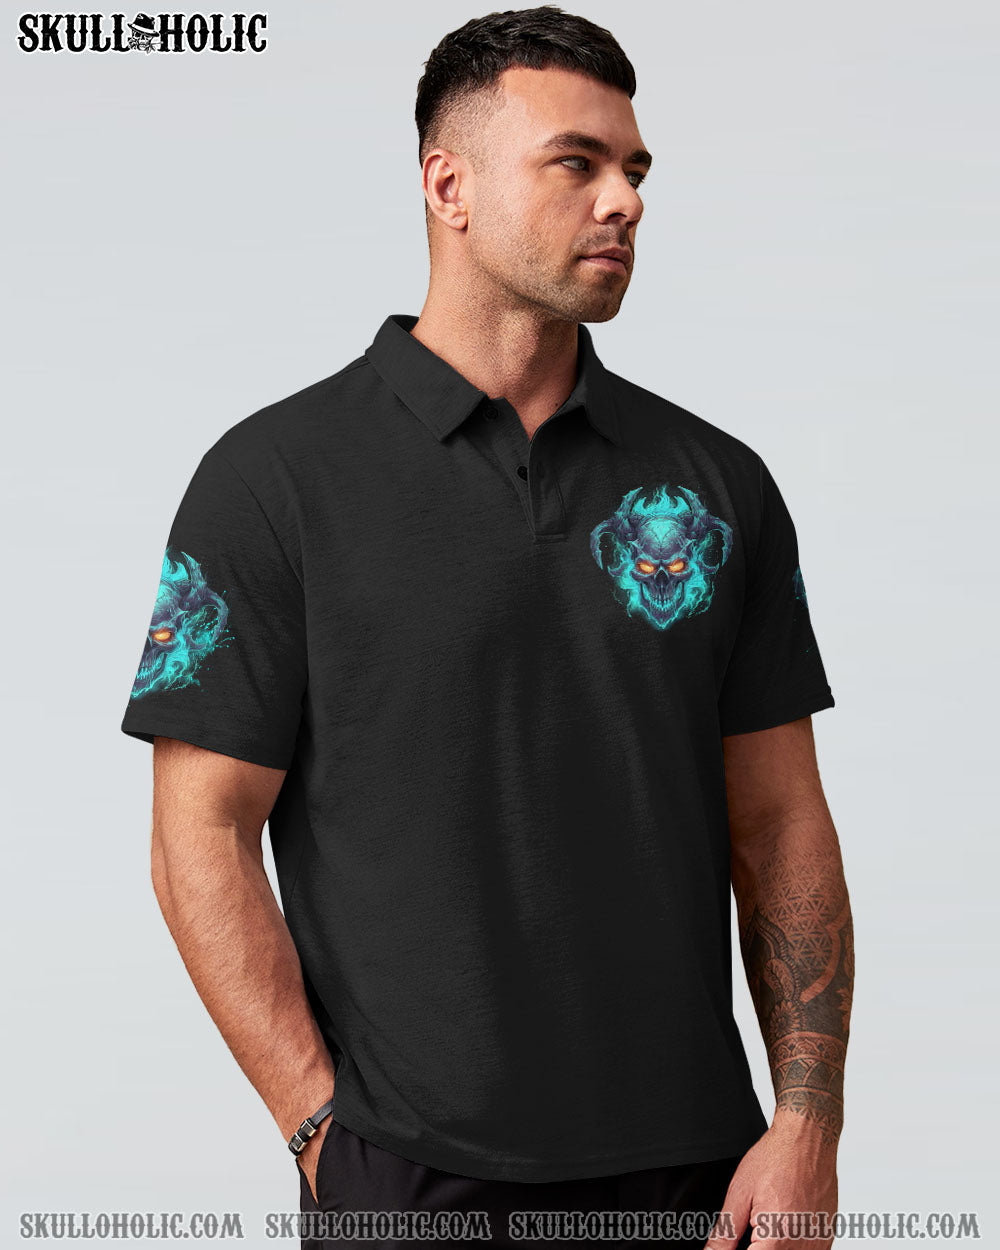 CATEGORY_SHORT SLEEVES